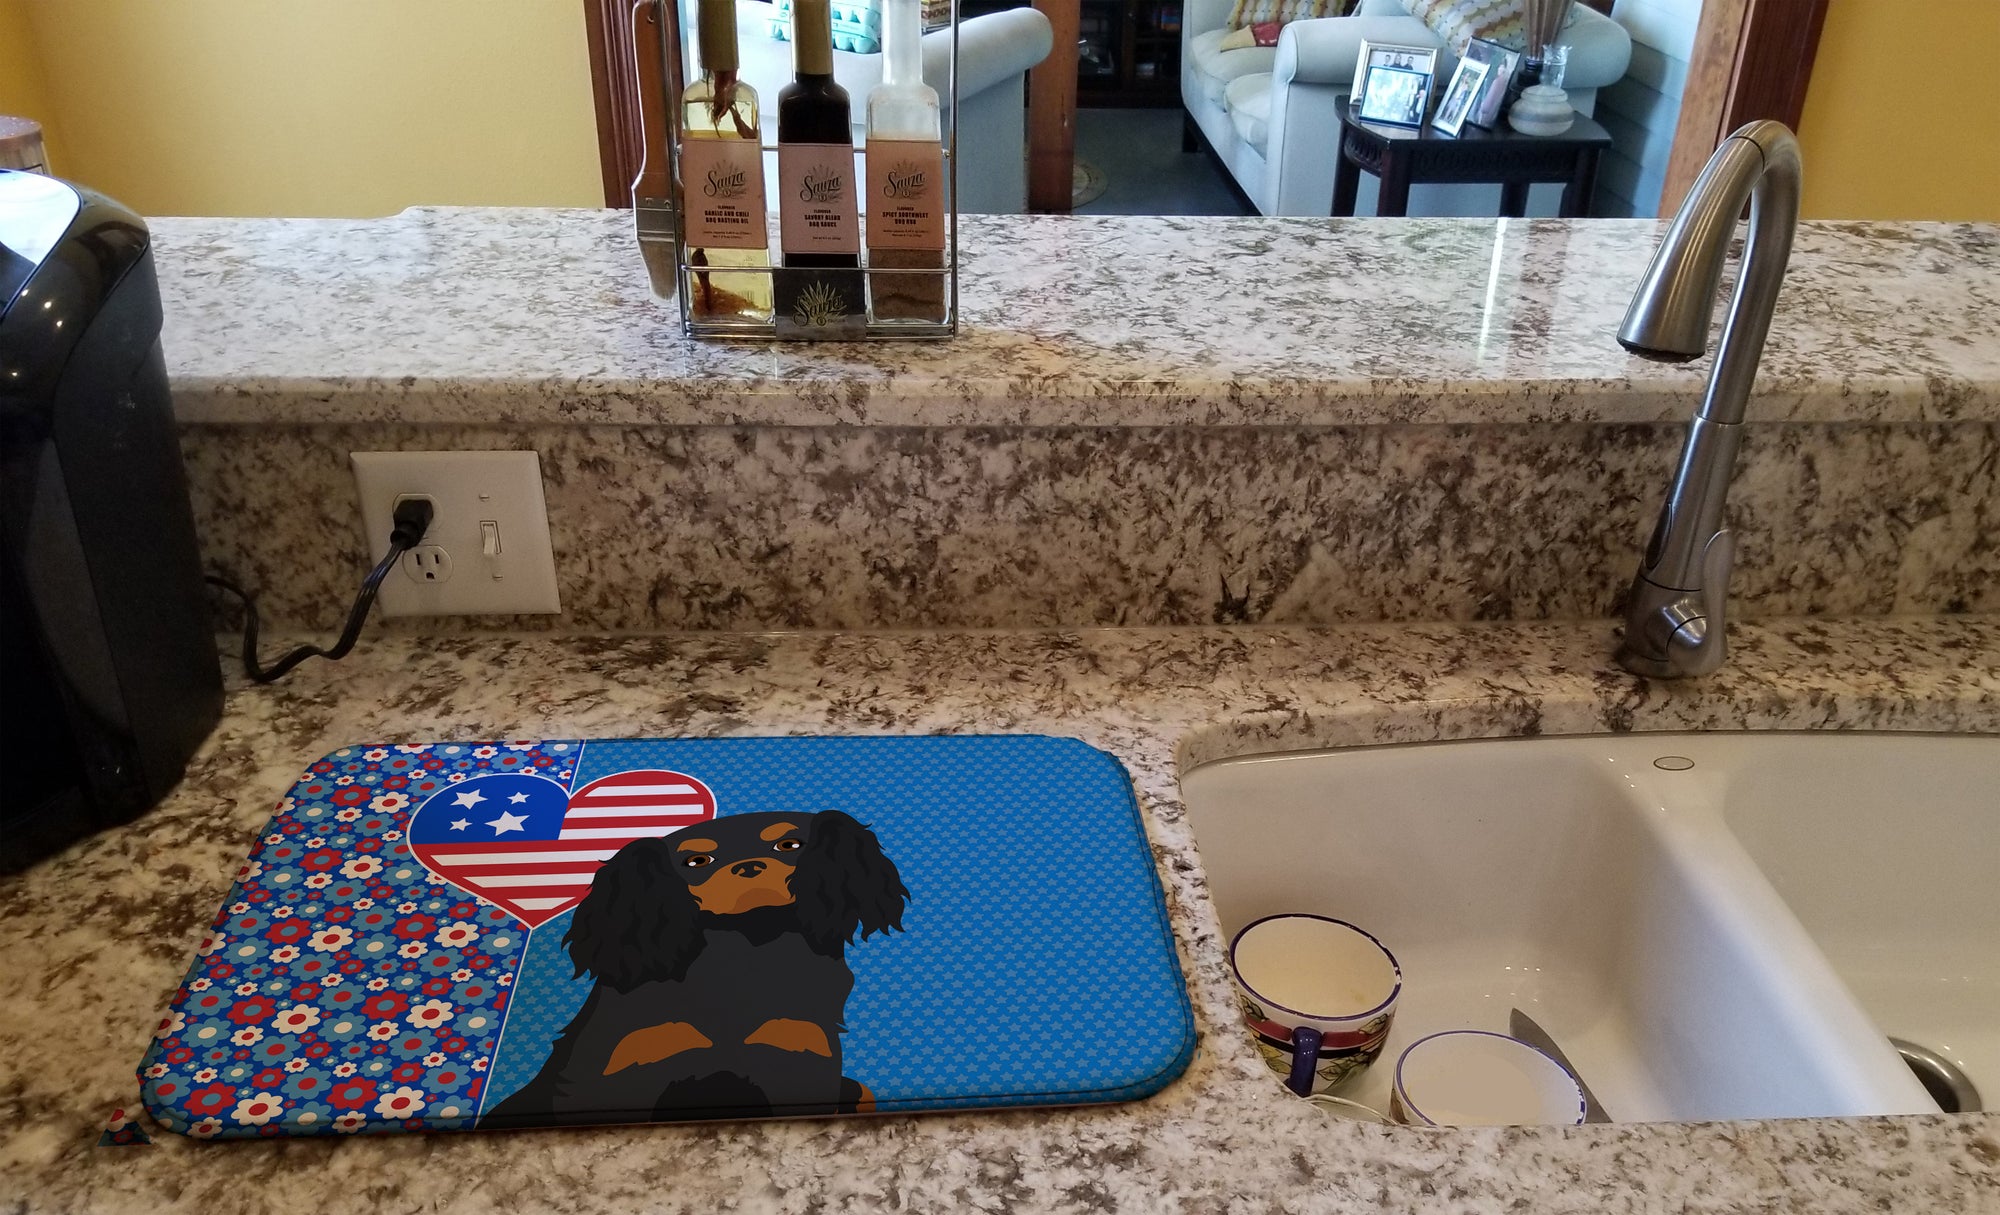 Black and Tan Cavalier Spaniel USA American Dish Drying Mat  the-store.com.